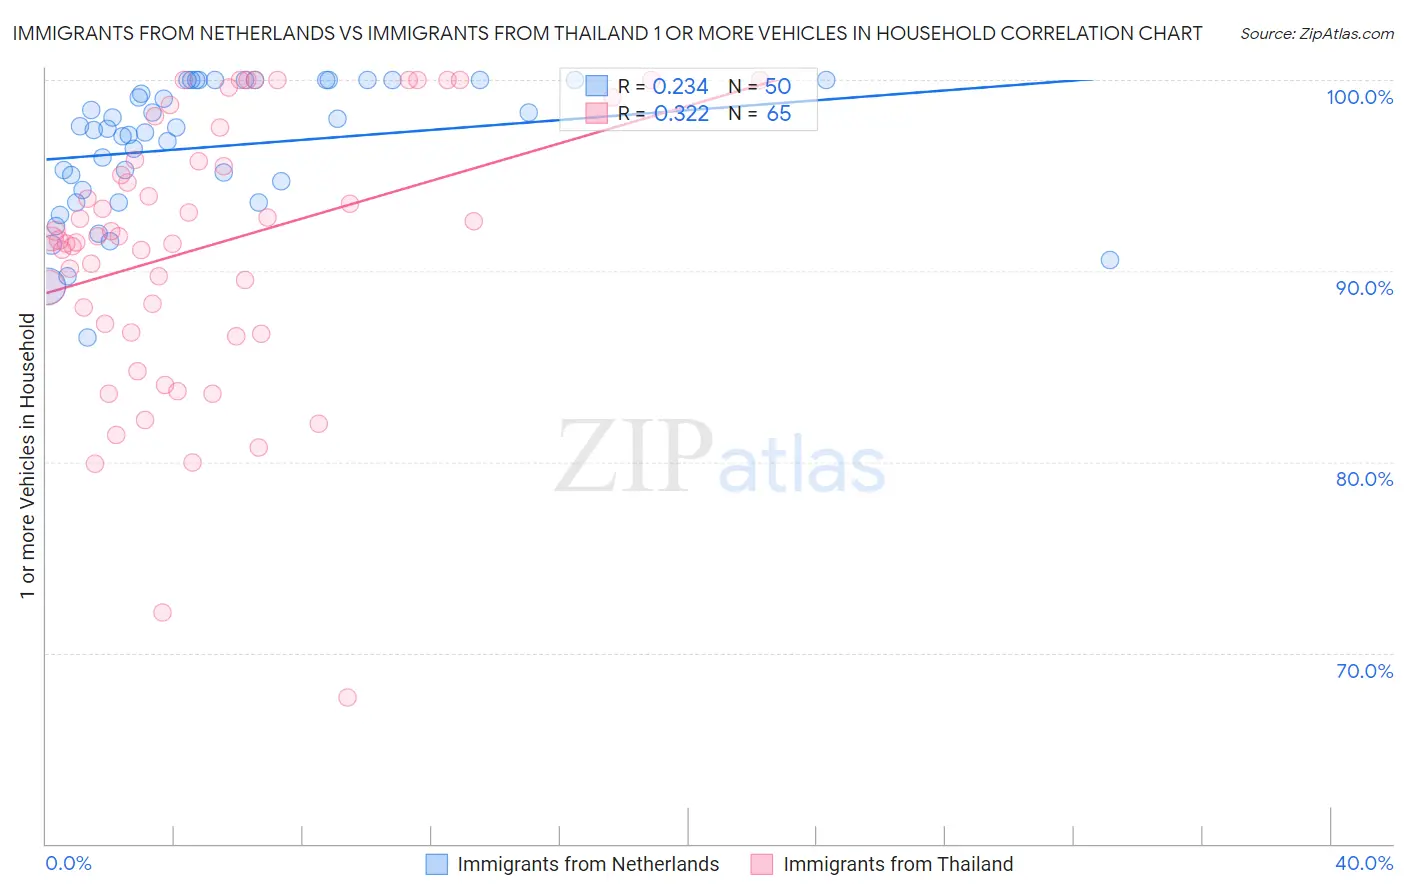 Immigrants from Netherlands vs Immigrants from Thailand 1 or more Vehicles in Household